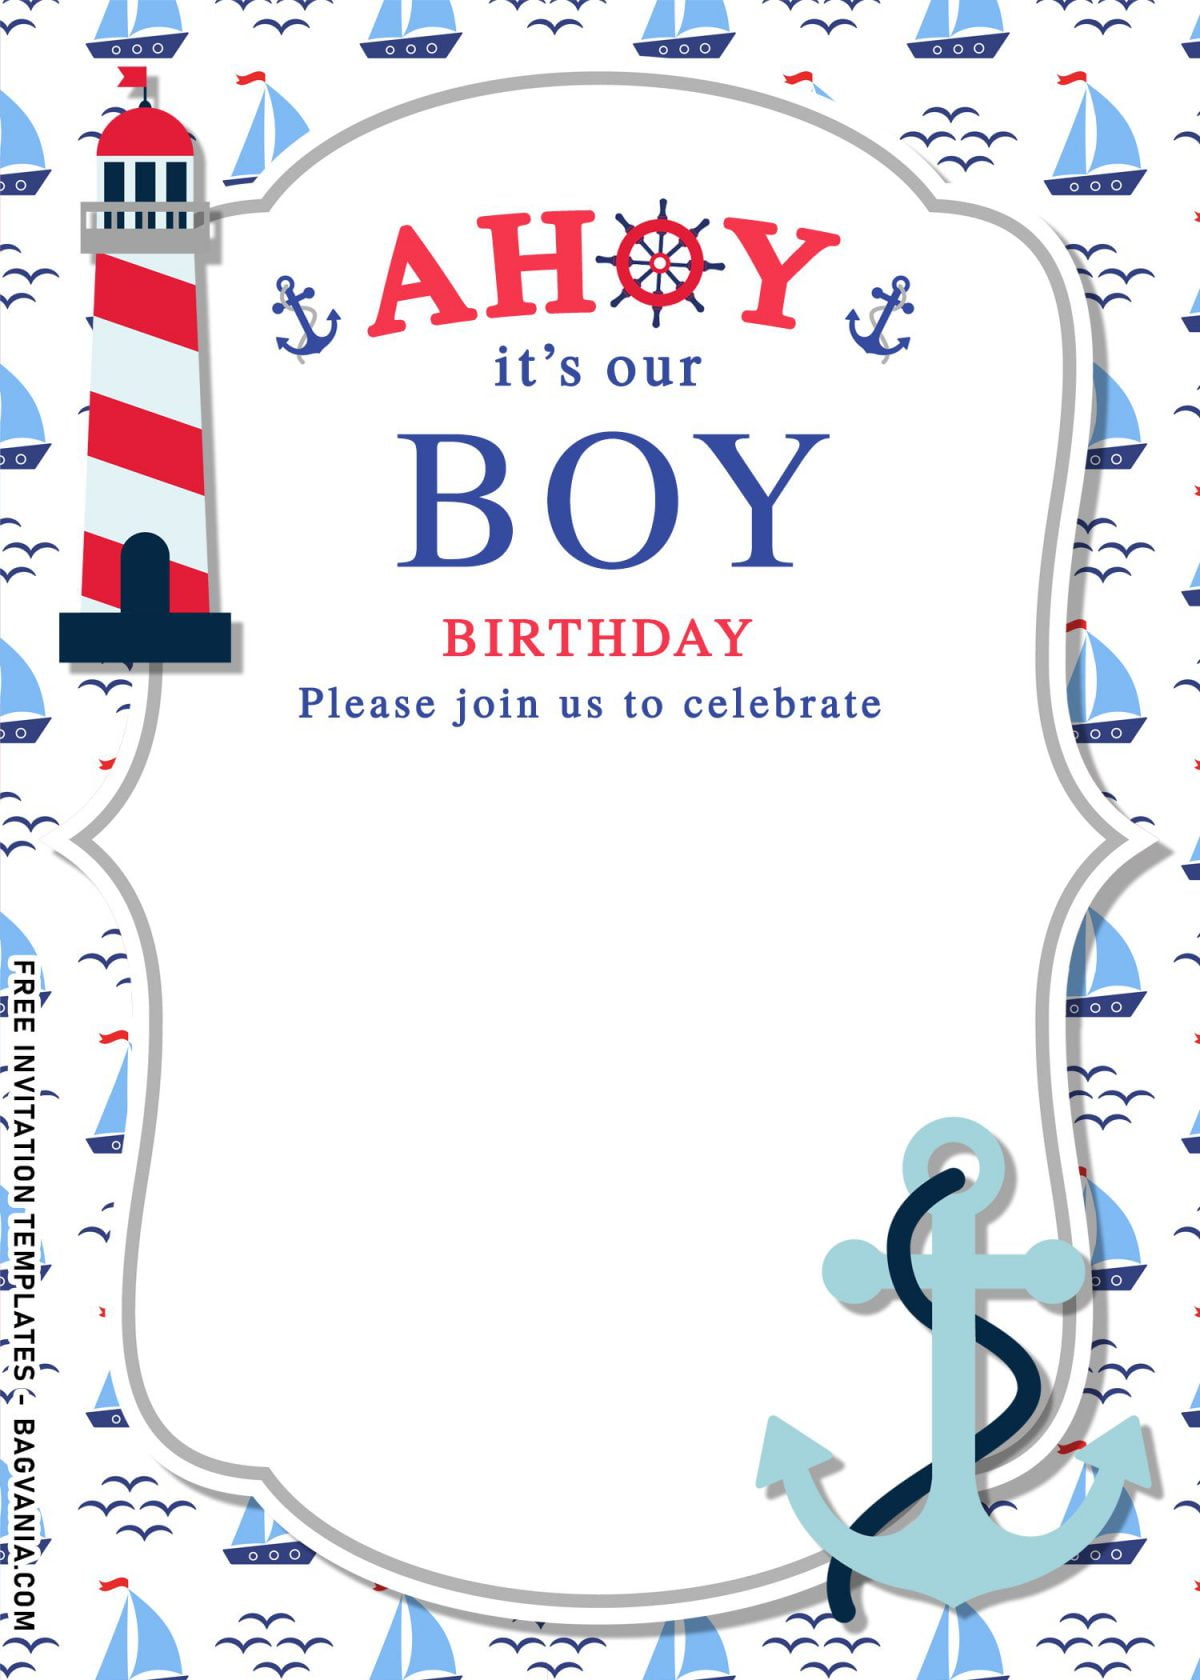 11+ Nautical Themed Birthday Invitation Templates For Your Kid’s Birthday Bash and has cute anchor